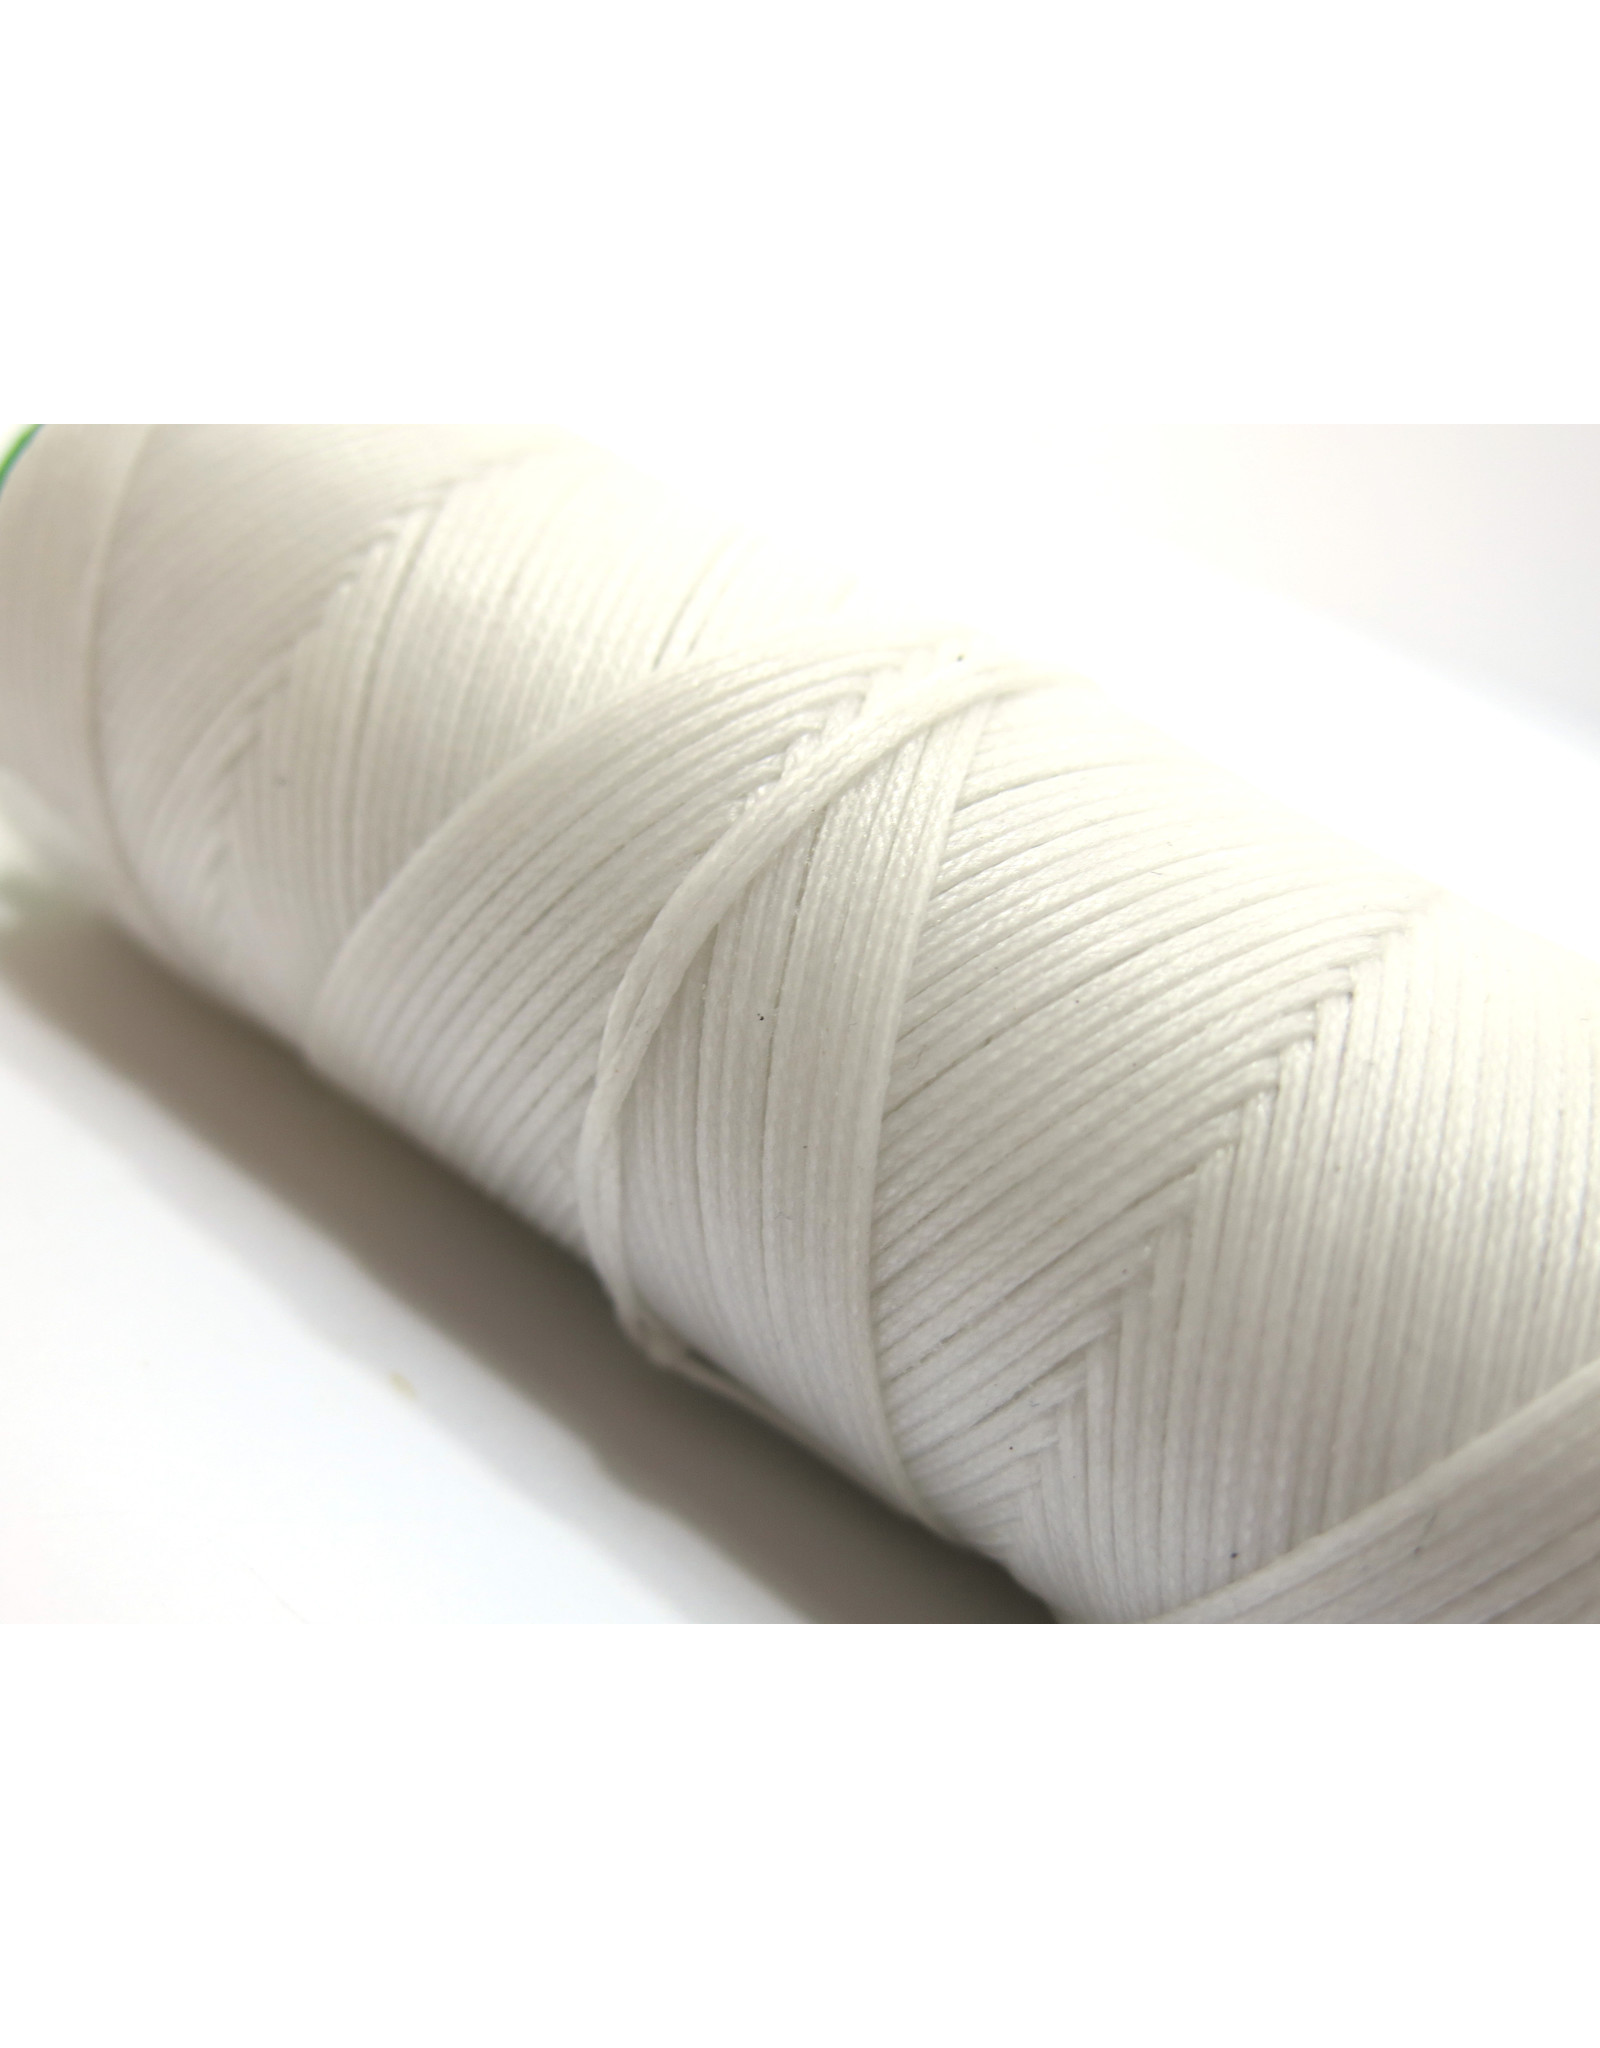 Waxed hand sewing thread white